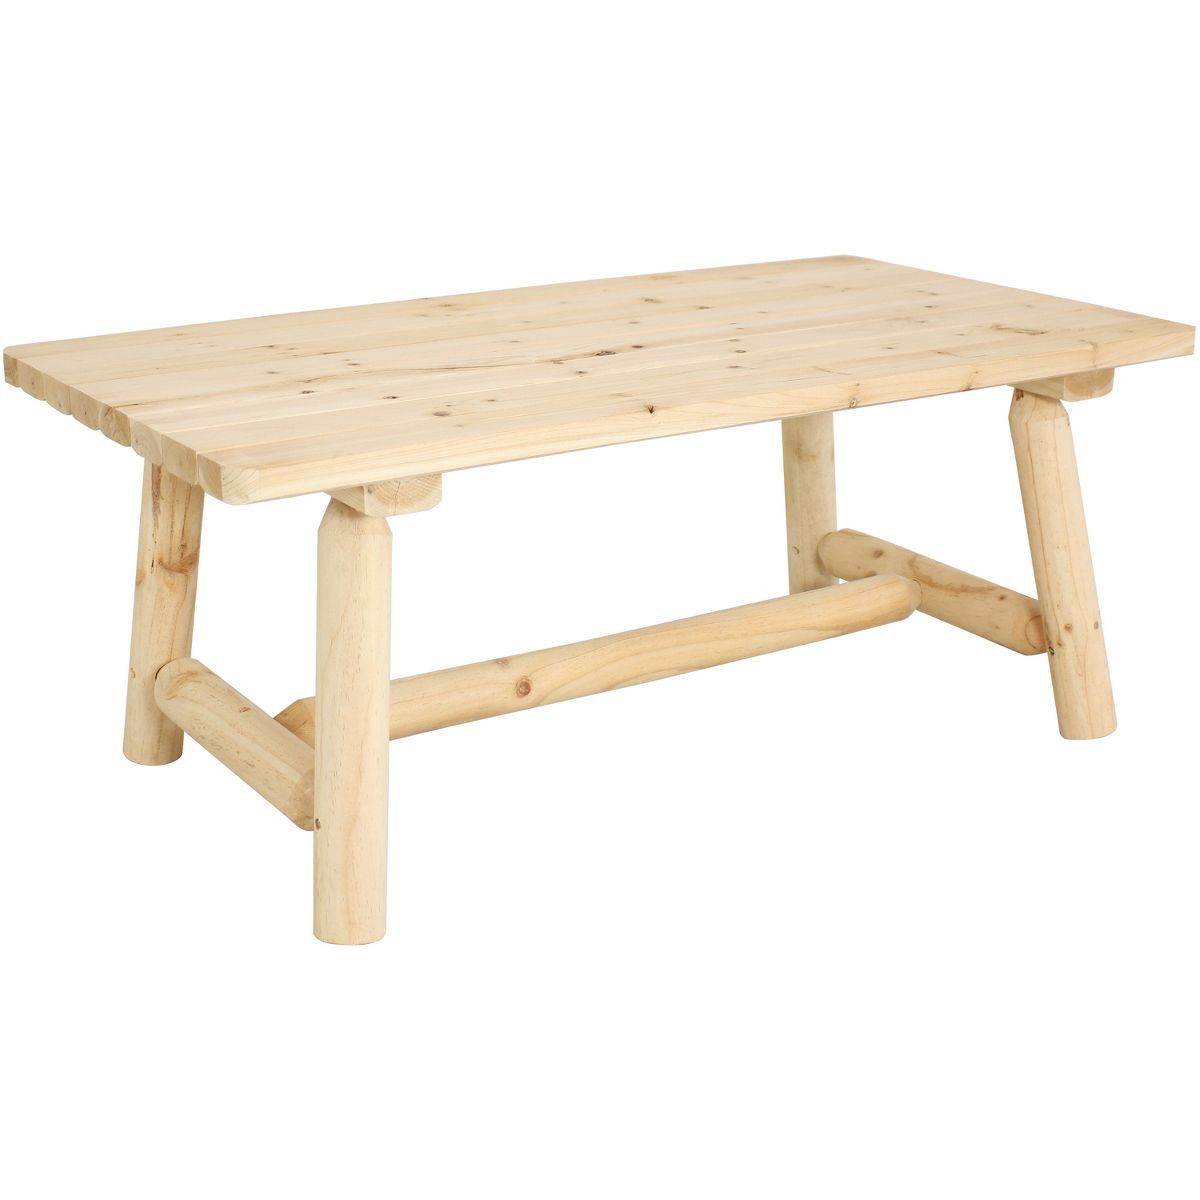 Sunnydaze Indoor/Outdoor Unfinished Natural Fir Wood Rustic Cabin Style Wooden Coffee Table - 41"... | Target